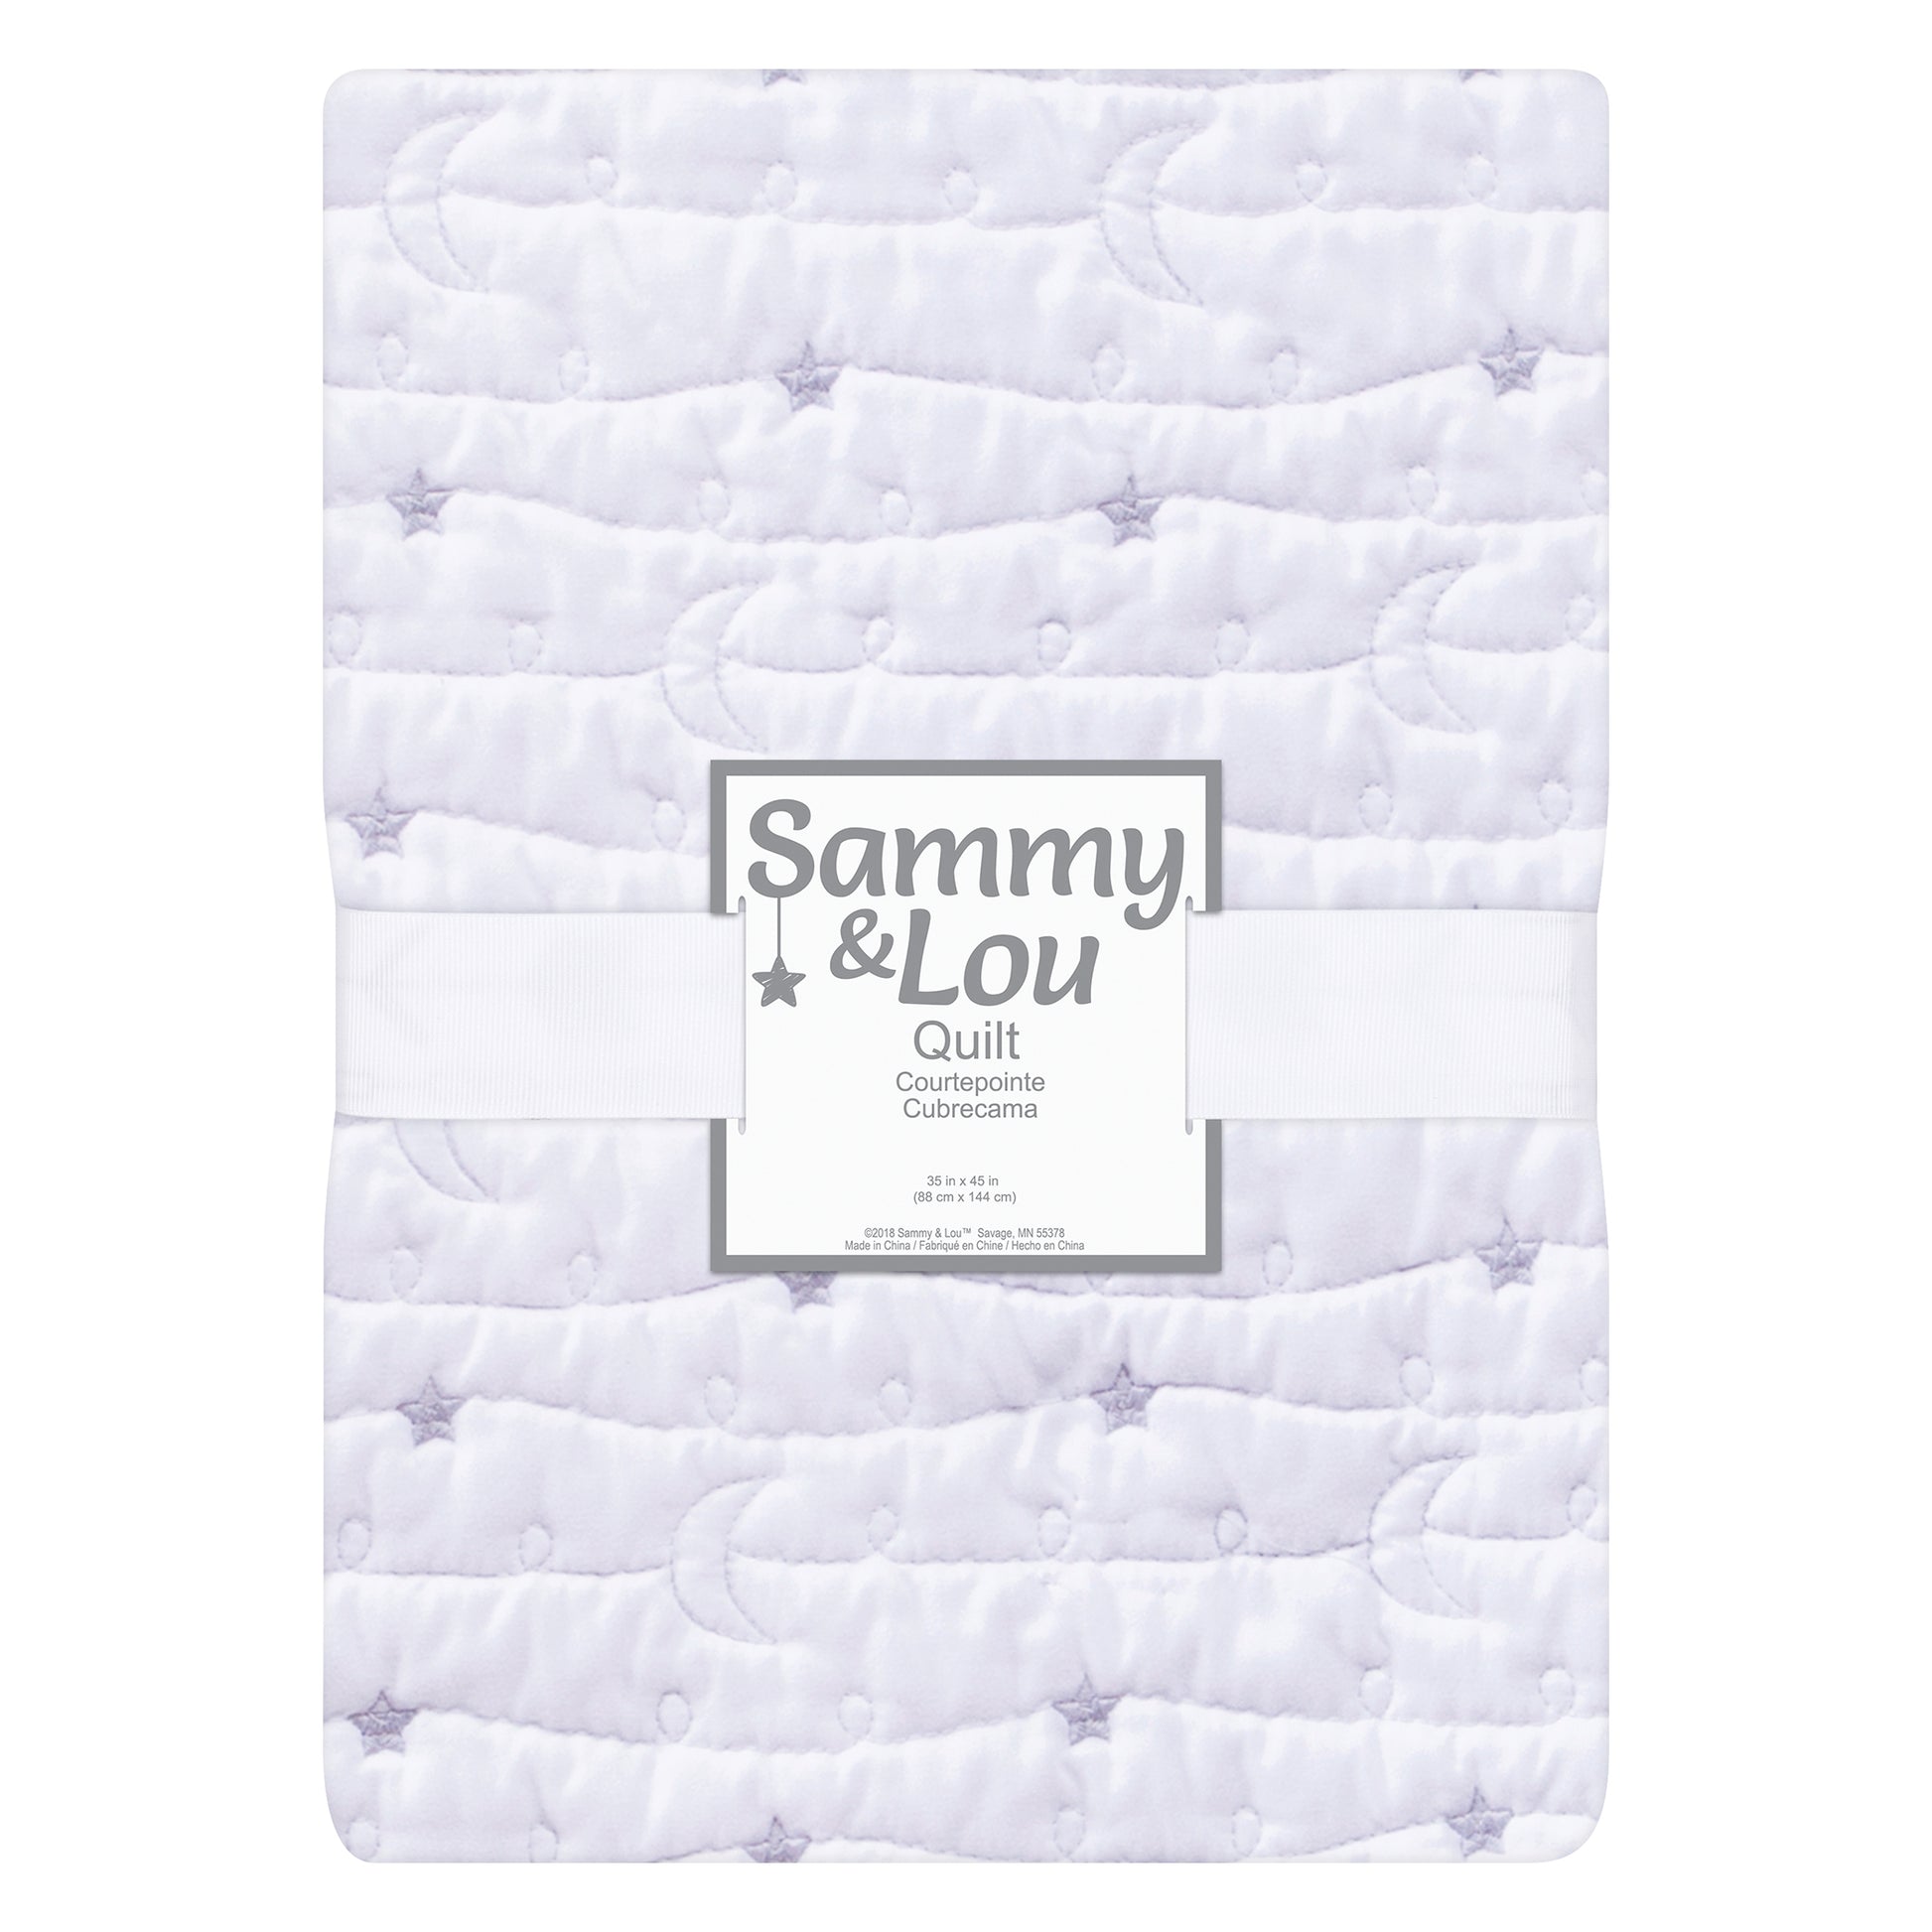 Sammy and Lou Moon and Stars Quilt55363$29.99Trend Lab